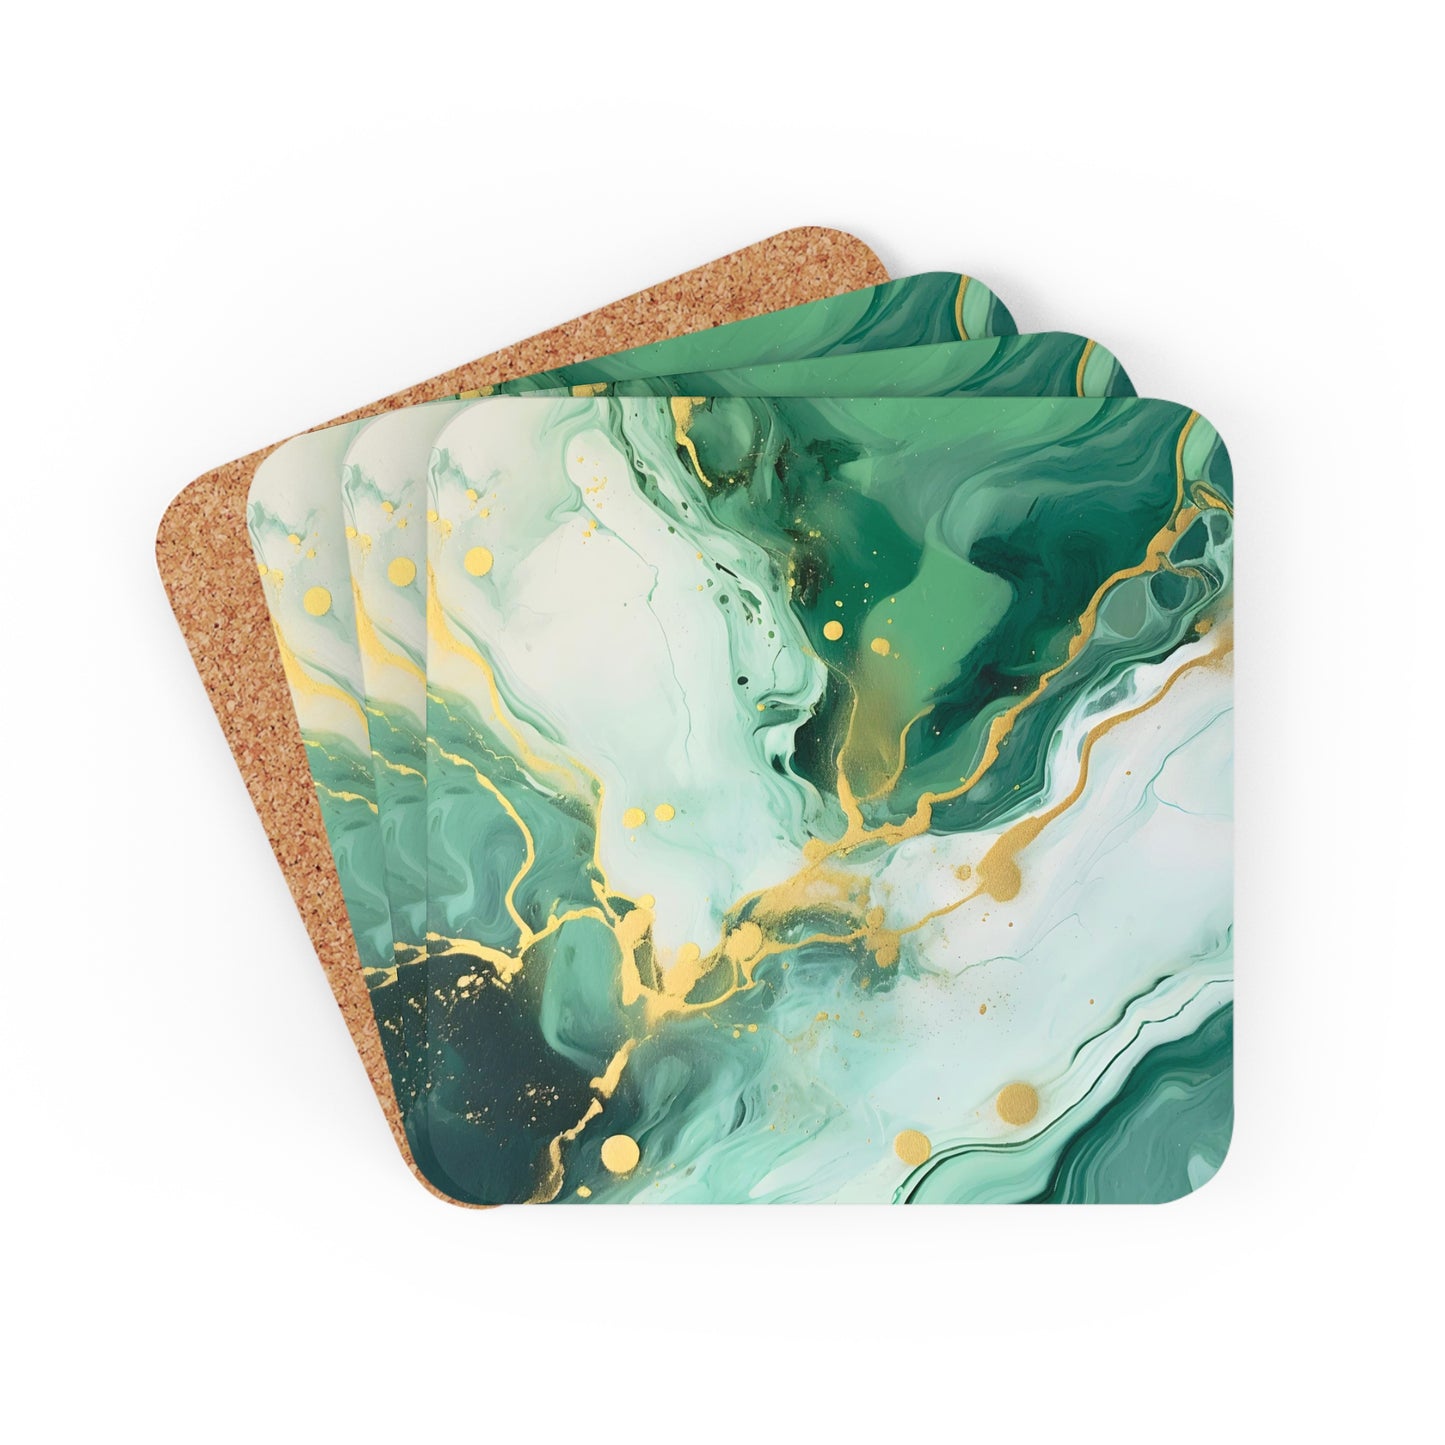 Soft Green and Ivory Geode | Set of 4 Coasters